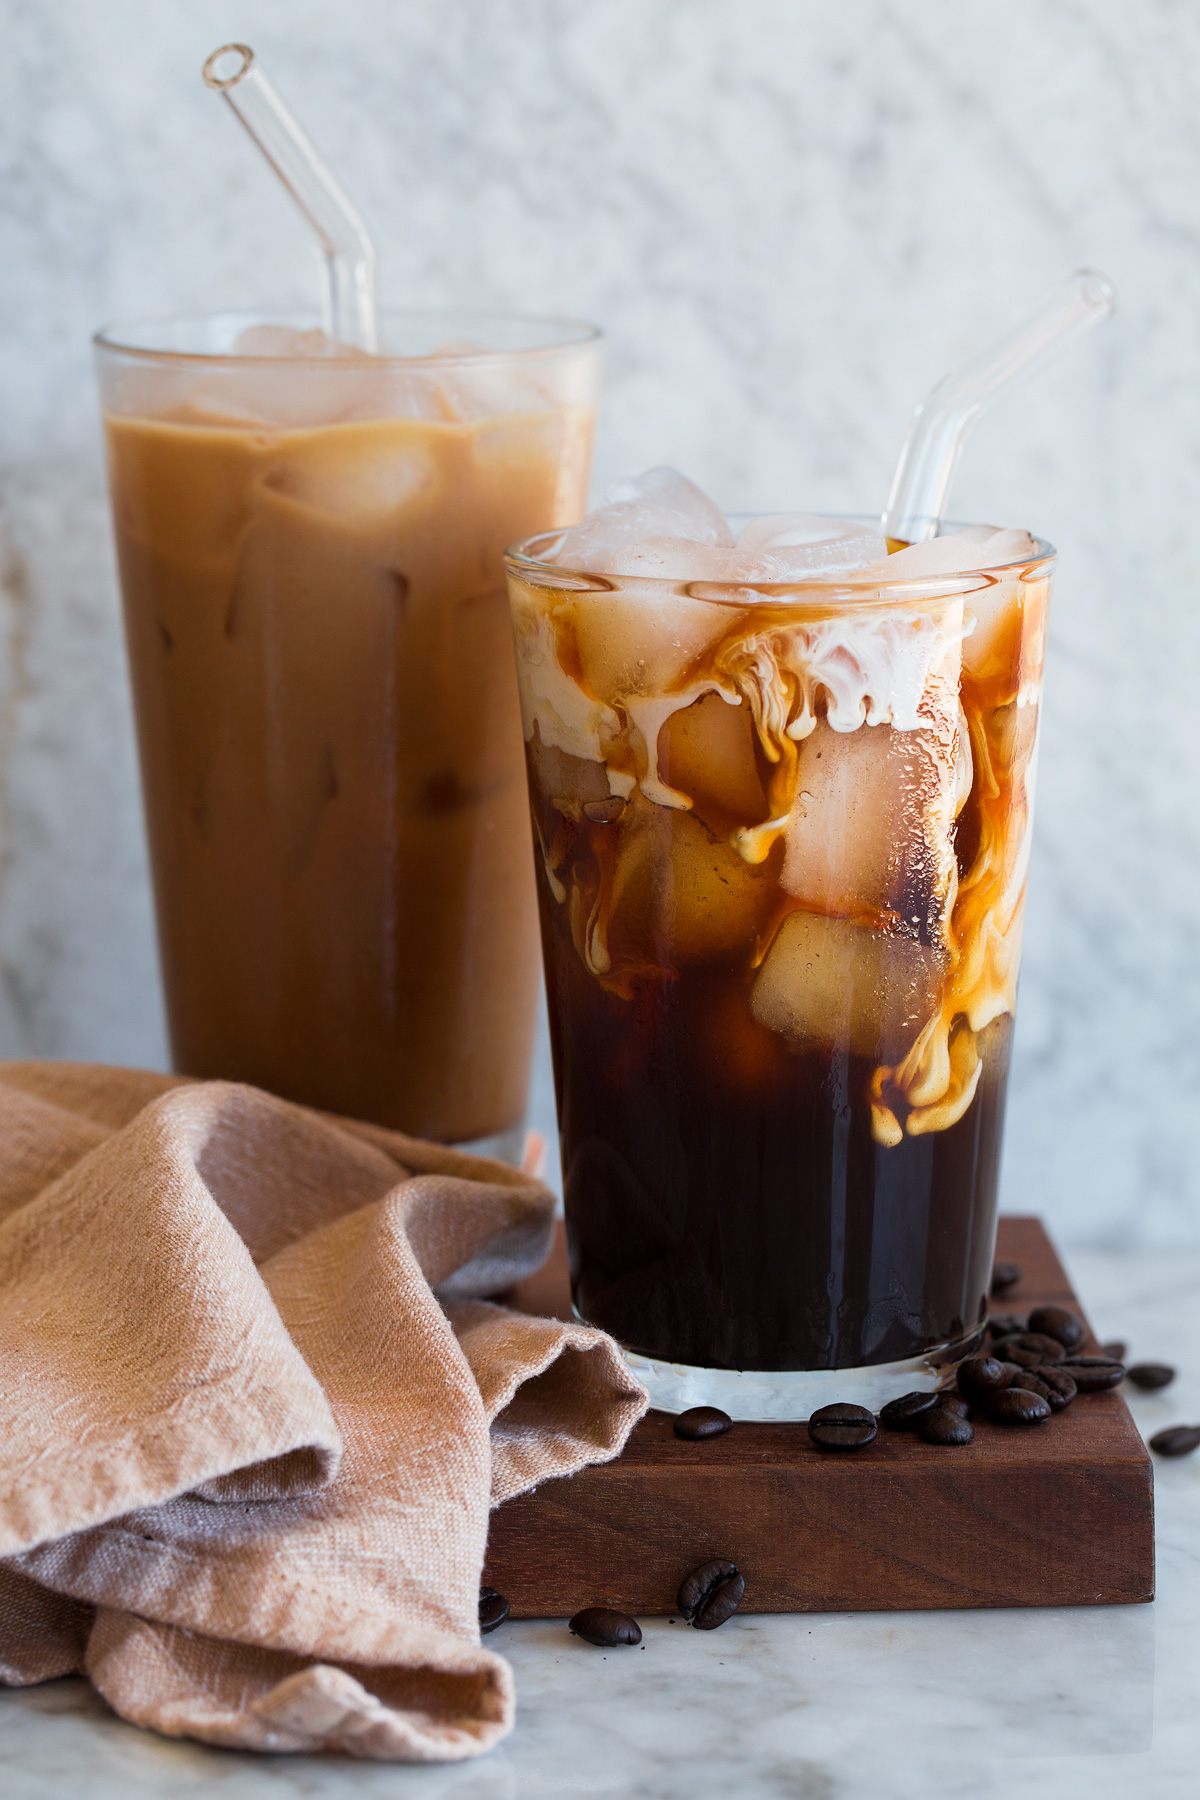 https://www.cookingclassy.com/wp-content/uploads/2022/07/iced-coffee-05.jpg